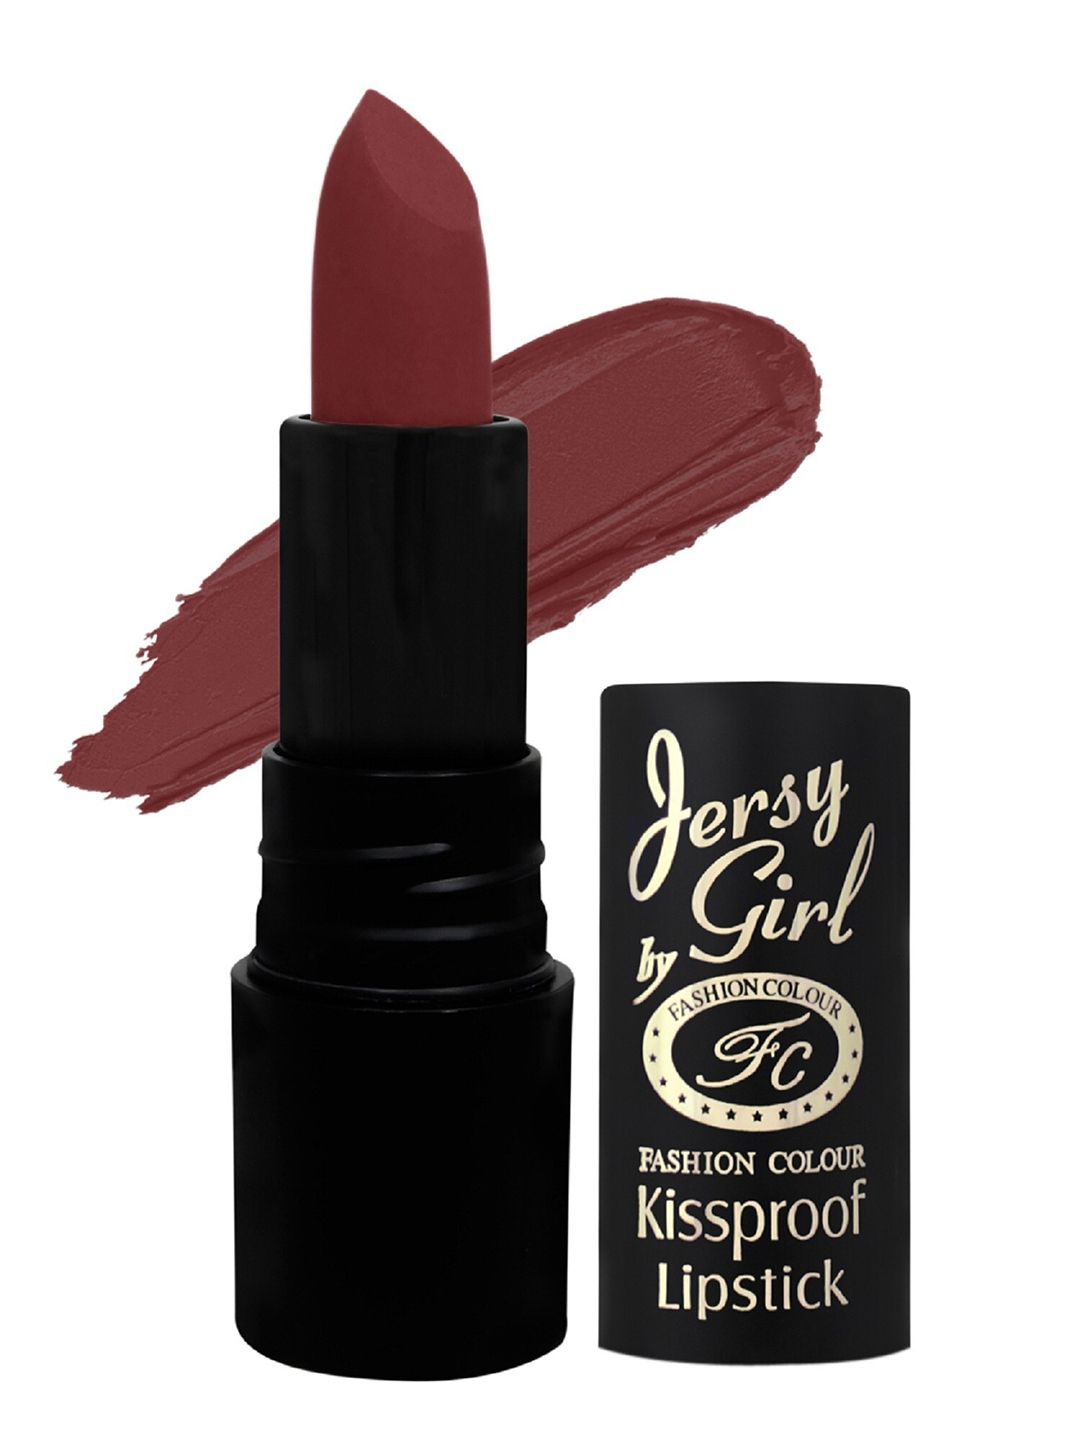 Fashion Colour  Jersy Girl Kiss proof Lipstick - Chestnut Brown 23 3.8 gm Price in India